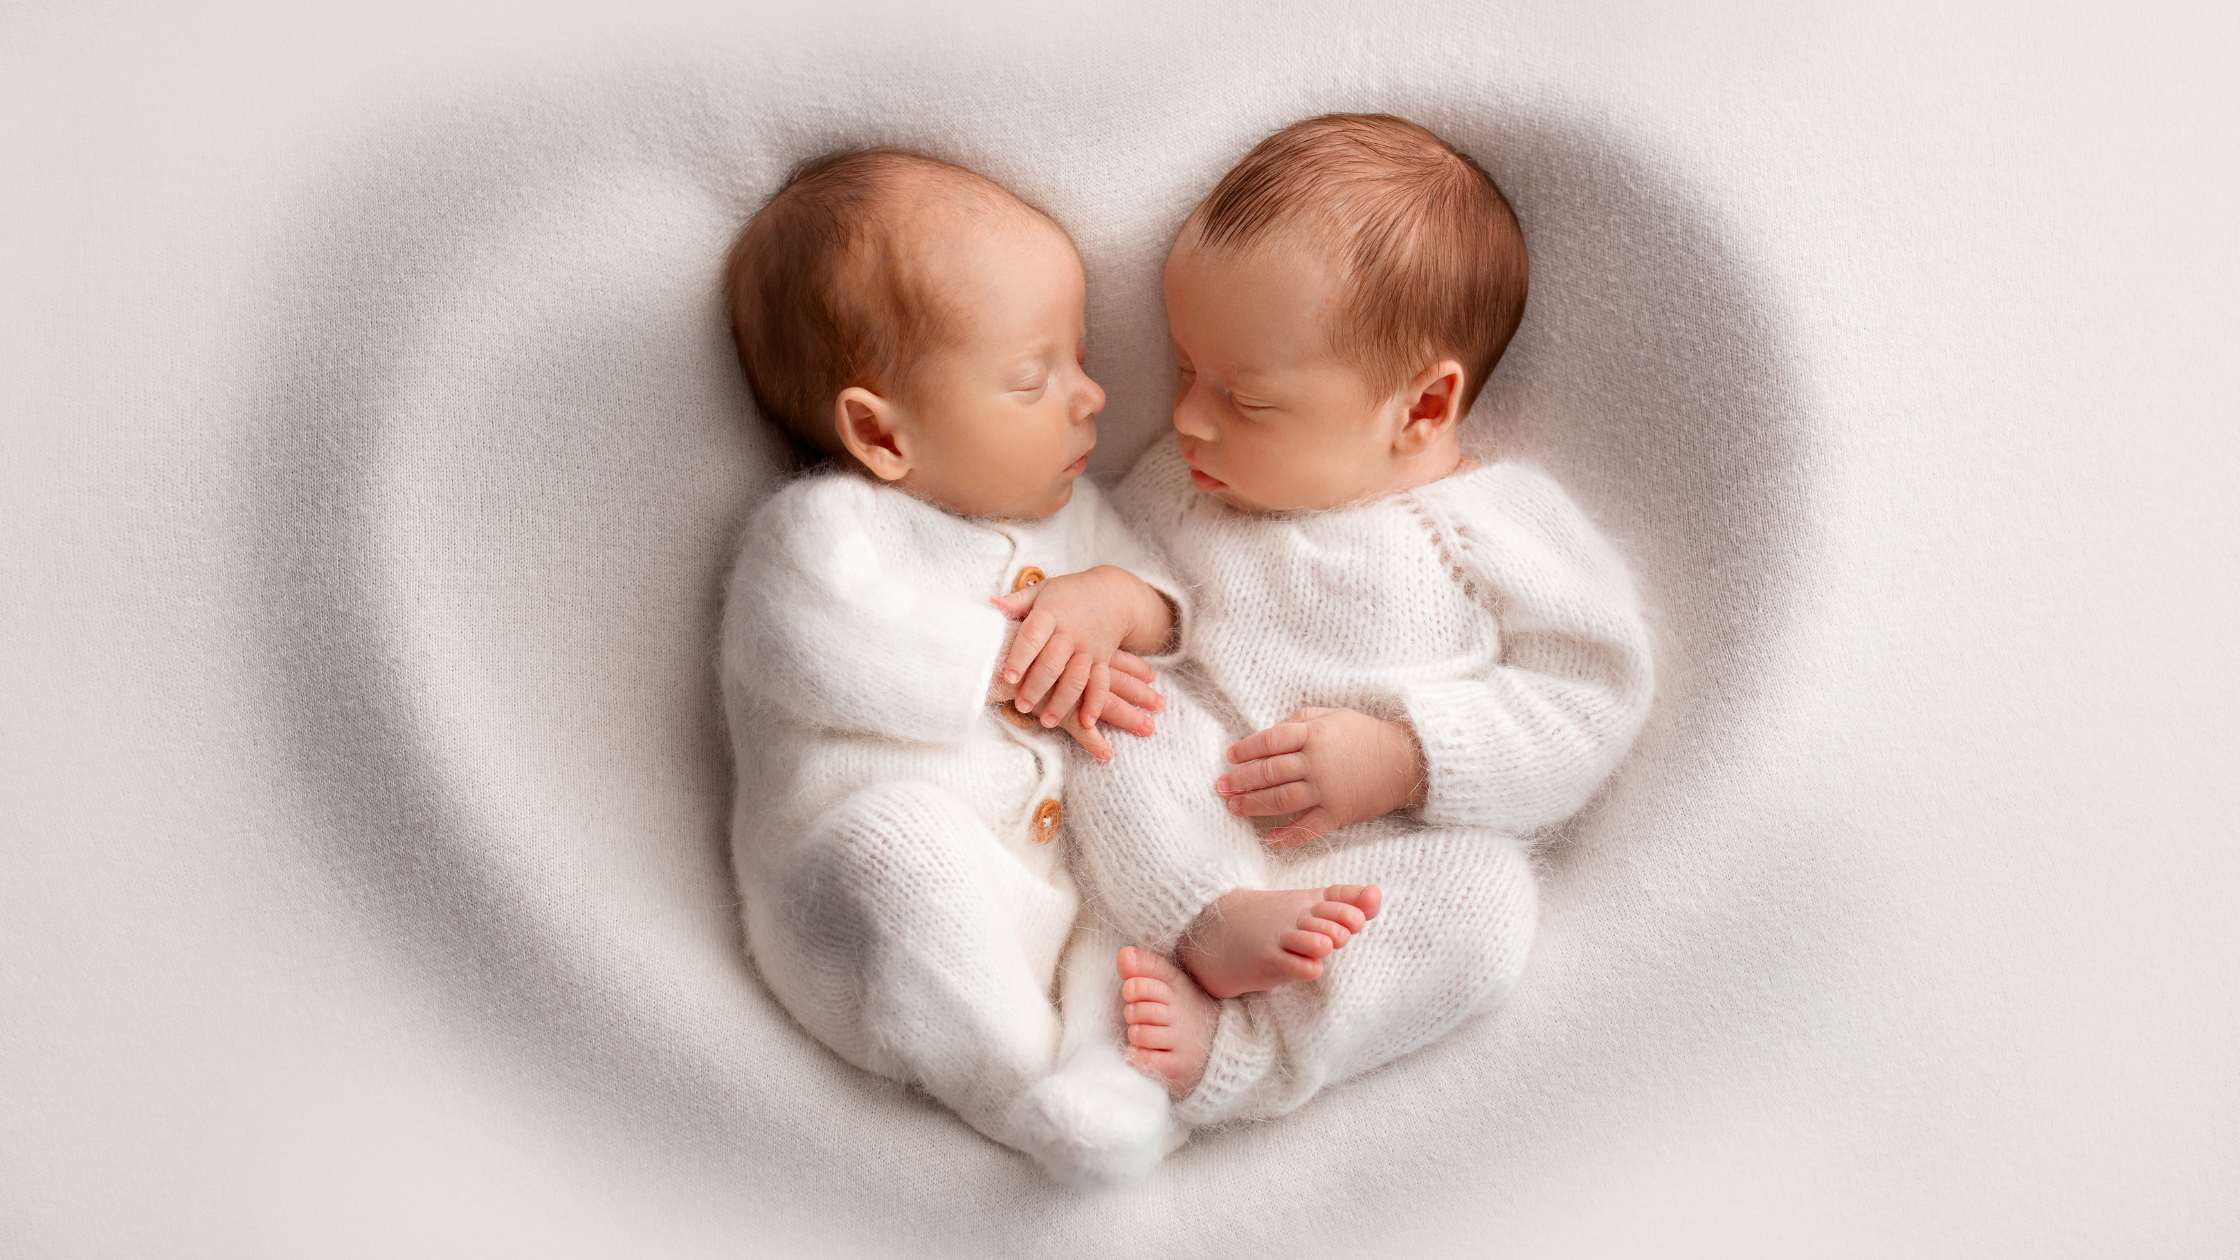 What Does It Mean When You Dream About Having Twins?